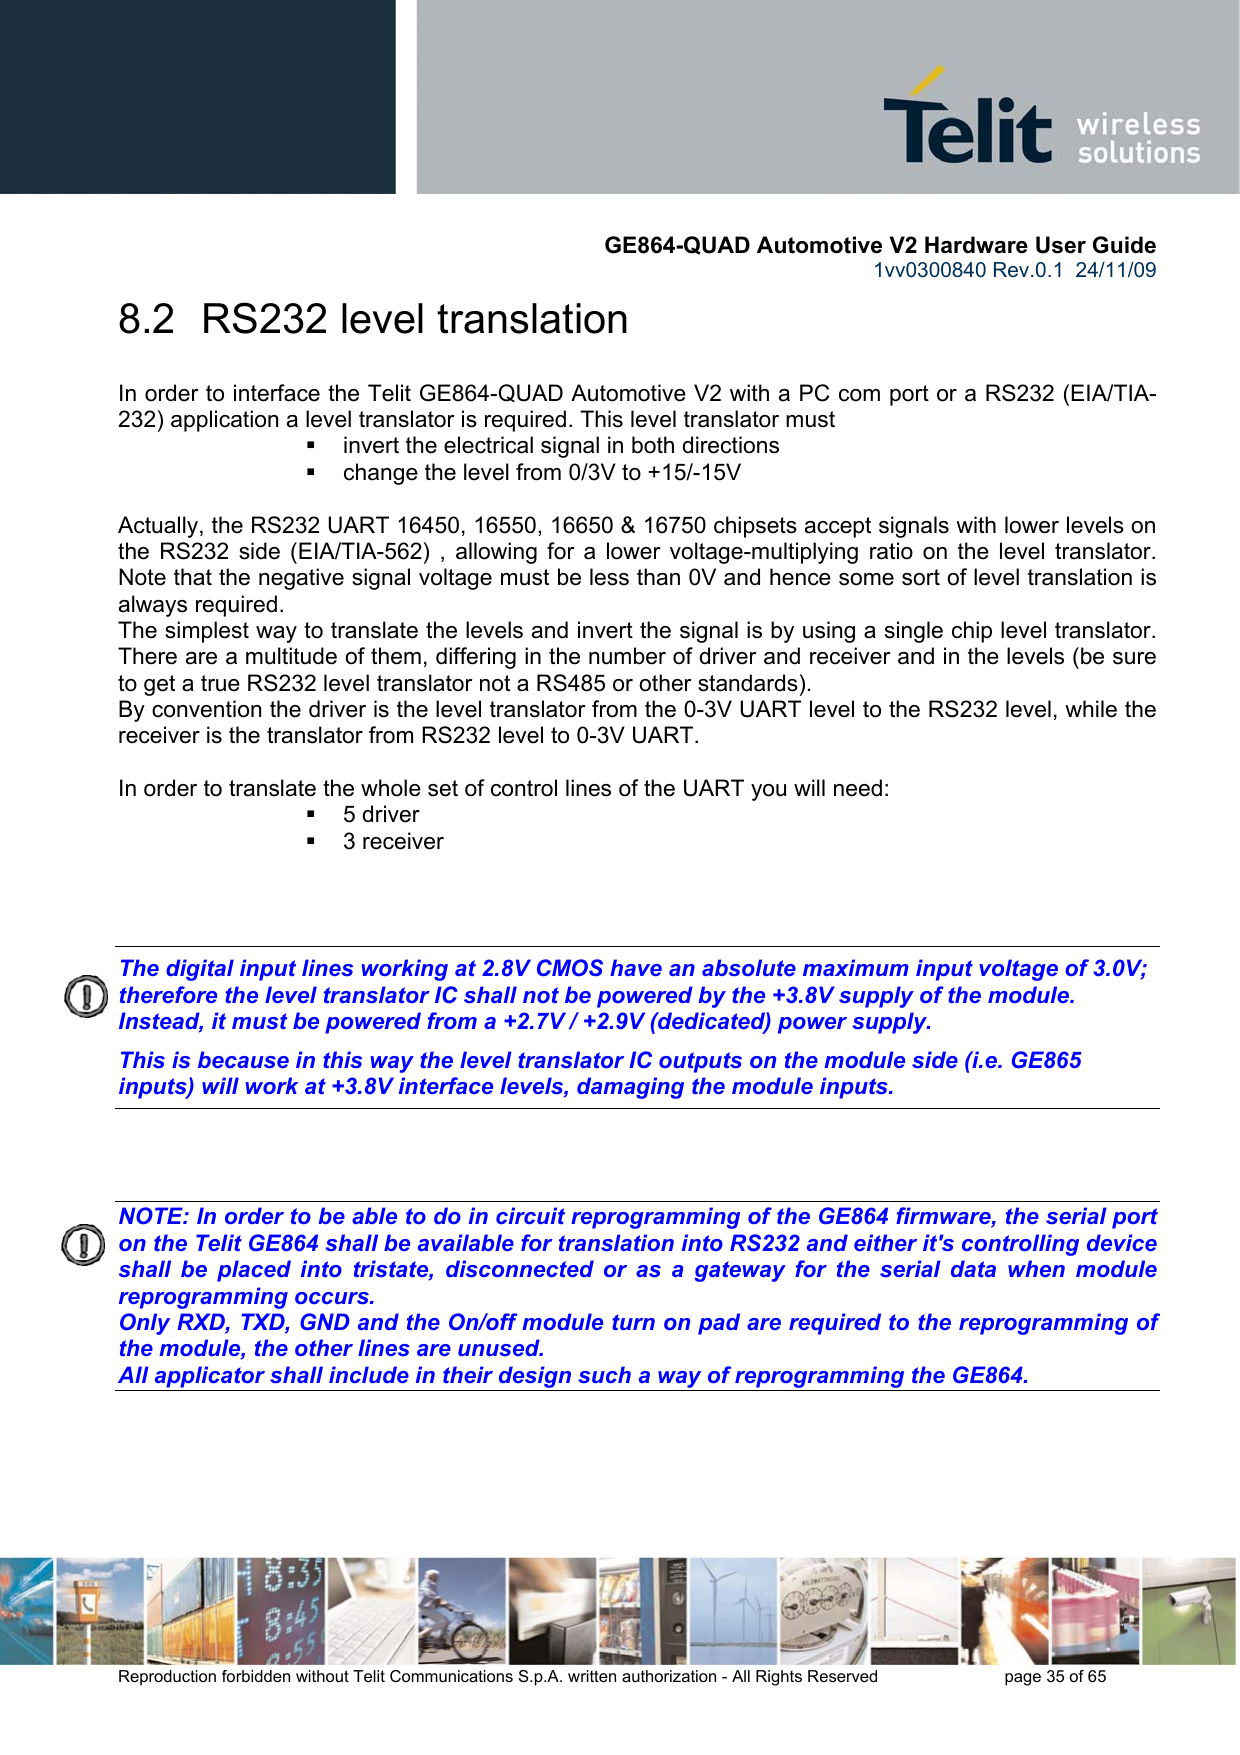       GE864-QUAD Automotive V2 Hardware User Guide 1vv0300840 Rev.0.1  24/11/09      Reproduction forbidden without Telit Communications S.p.A. written authorization - All Rights Reserved    page 35 of 65  8.2  RS232 level translation In order to interface the Telit GE864-QUAD Automotive V2 with a PC com port or a RS232 (EIA/TIA-232) application a level translator is required. This level translator must   invert the electrical signal in both directions   change the level from 0/3V to +15/-15V   Actually, the RS232 UART 16450, 16550, 16650 &amp; 16750 chipsets accept signals with lower levels on the RS232 side (EIA/TIA-562) , allowing for a lower voltage-multiplying ratio on the level translator. Note that the negative signal voltage must be less than 0V and hence some sort of level translation is always required.  The simplest way to translate the levels and invert the signal is by using a single chip level translator. There are a multitude of them, differing in the number of driver and receiver and in the levels (be sure to get a true RS232 level translator not a RS485 or other standards). By convention the driver is the level translator from the 0-3V UART level to the RS232 level, while the receiver is the translator from RS232 level to 0-3V UART.  In order to translate the whole set of control lines of the UART you will need:  5 driver  3 receiver    The digital input lines working at 2.8V CMOS have an absolute maximum input voltage of 3.0V; therefore the level translator IC shall not be powered by the +3.8V supply of the module. Instead, it must be powered from a +2.7V / +2.9V (dedicated) power supply. This is because in this way the level translator IC outputs on the module side (i.e. GE865 inputs) will work at +3.8V interface levels, damaging the module inputs.    NOTE: In order to be able to do in circuit reprogramming of the GE864 firmware, the serial port on the Telit GE864 shall be available for translation into RS232 and either it&apos;s controlling device shall be placed into tristate, disconnected or as a gateway for the serial data when module reprogramming occurs. Only RXD, TXD, GND and the On/off module turn on pad are required to the reprogramming of the module, the other lines are unused. All applicator shall include in their design such a way of reprogramming the GE864.    